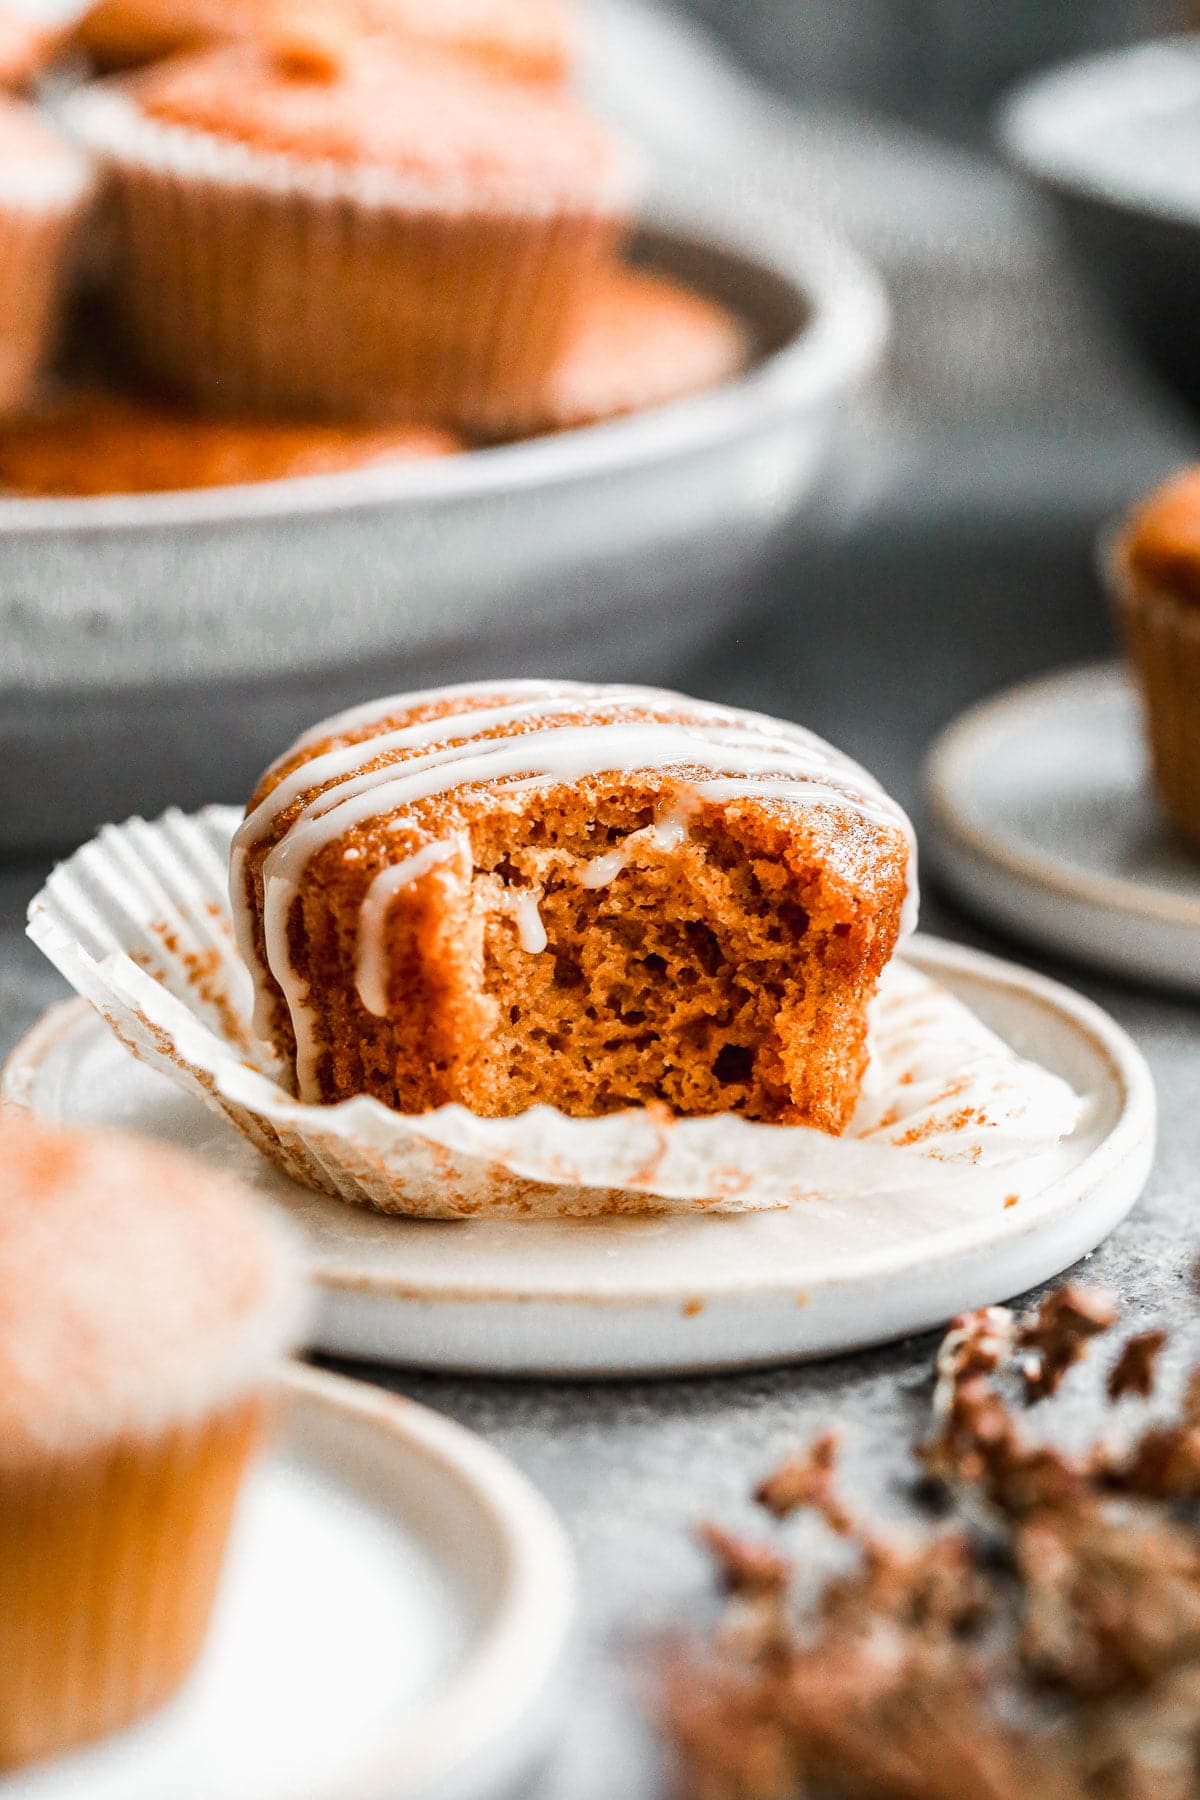 Our Easy Pumpkin Muffin Recipe is full of pumpkin flavor with notes of apple cider and the most tender, moist interior. Hands down the best pumpkin muffin recipe you'll make this fall! We drizzle the tops with a two-ingredient apple cider glaze but these are just as scrumptious plain. 